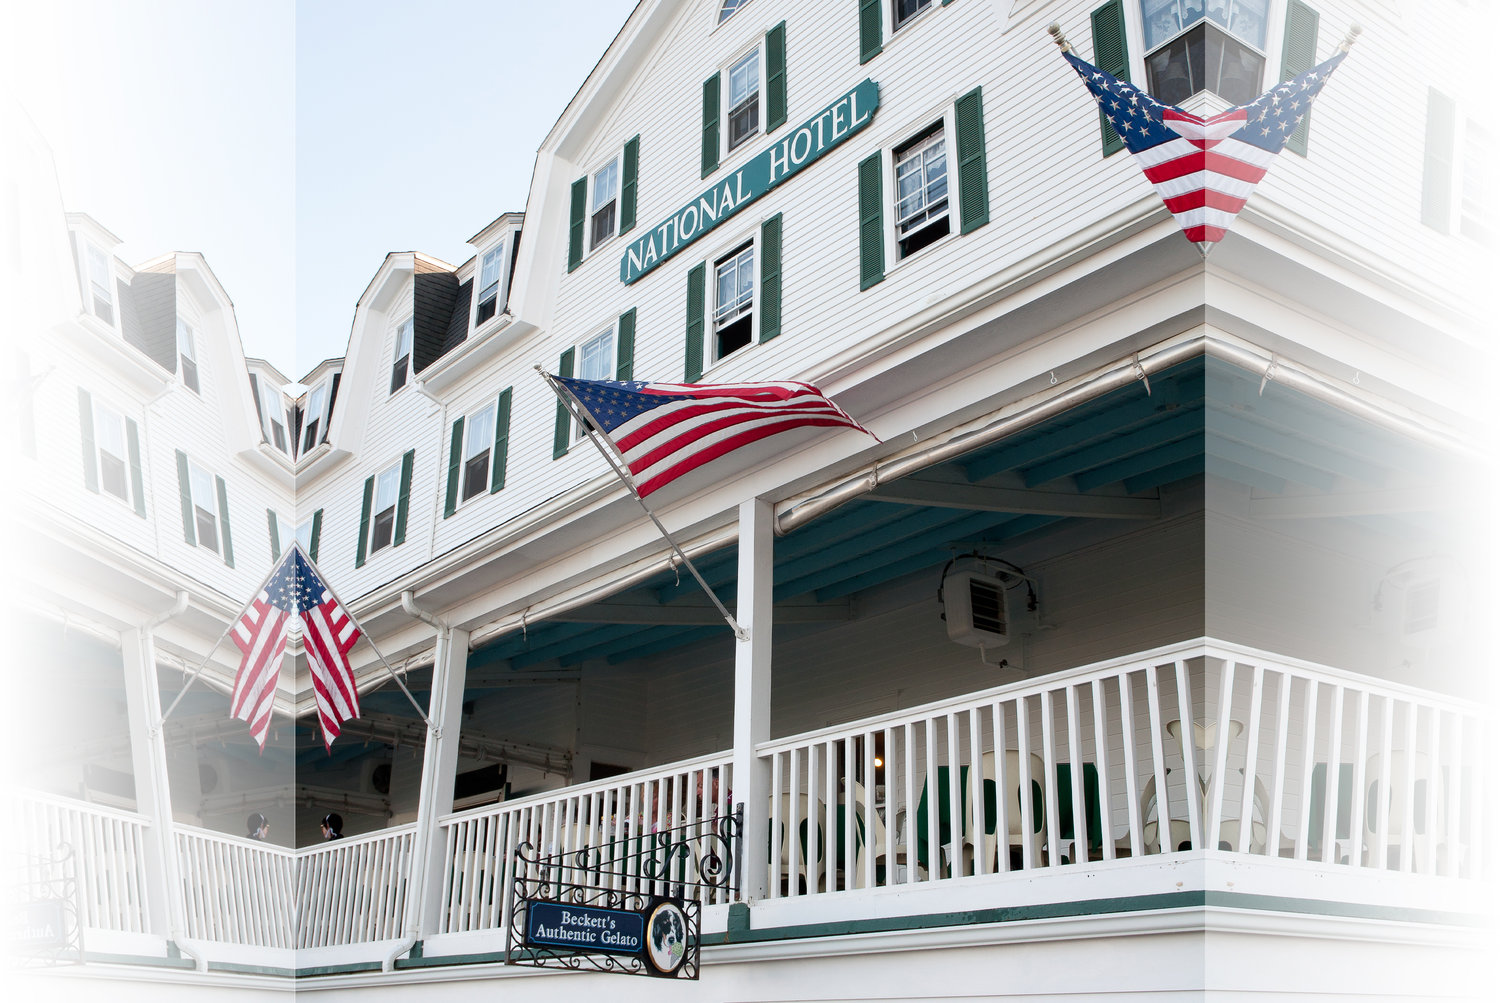 The National Hotel is Block Island’s flagship Victorian hotel